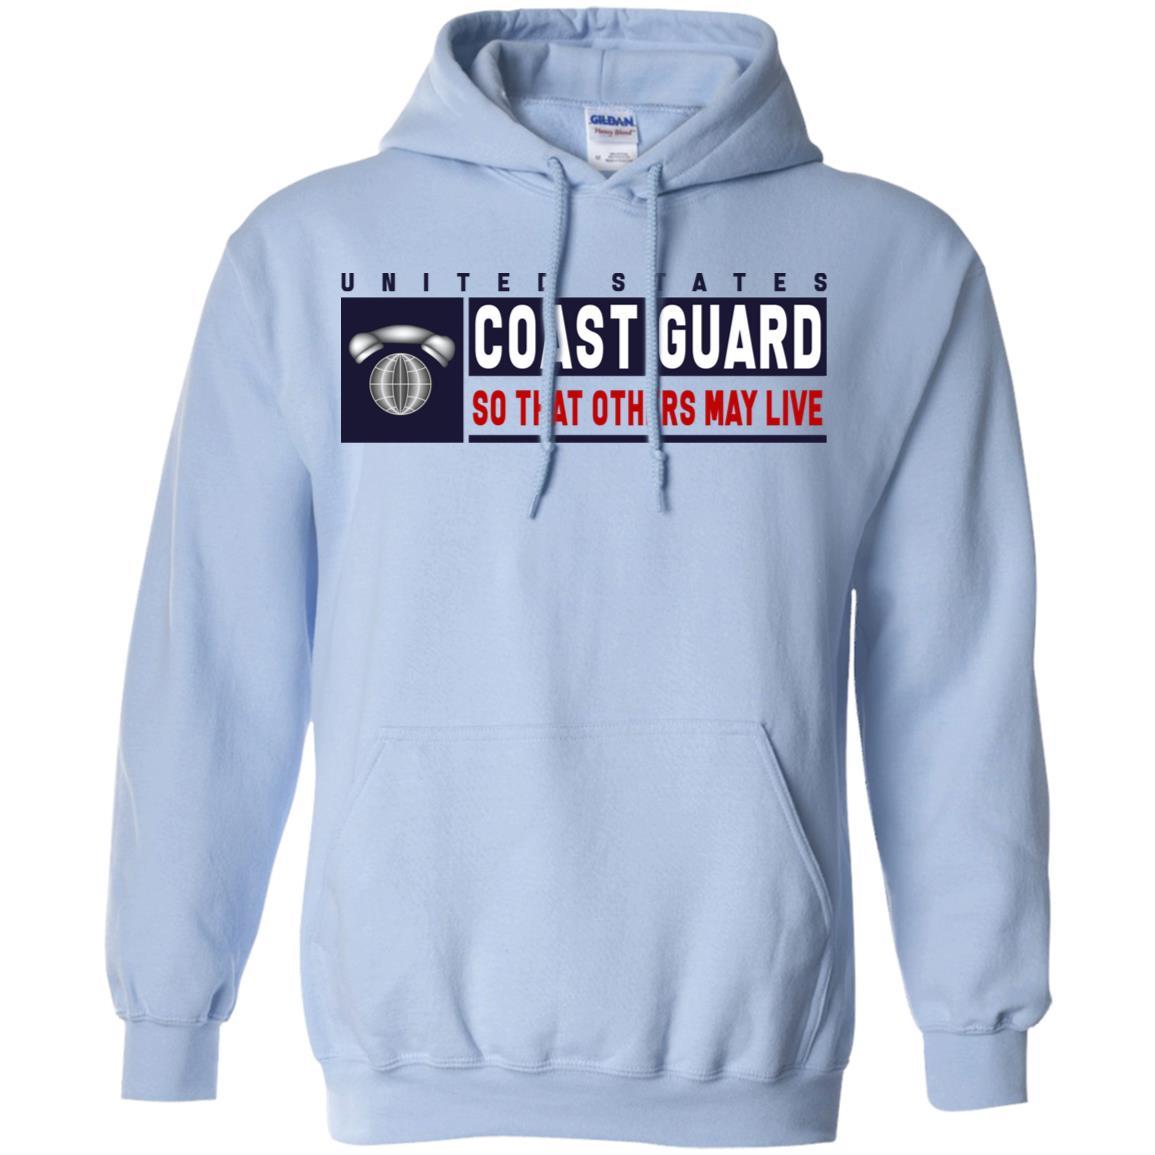 US Coast Guard Information Systems Technician IT Logo- So that others may live Long Sleeve - Pullover Hoodie-TShirt-USCG-Veterans Nation